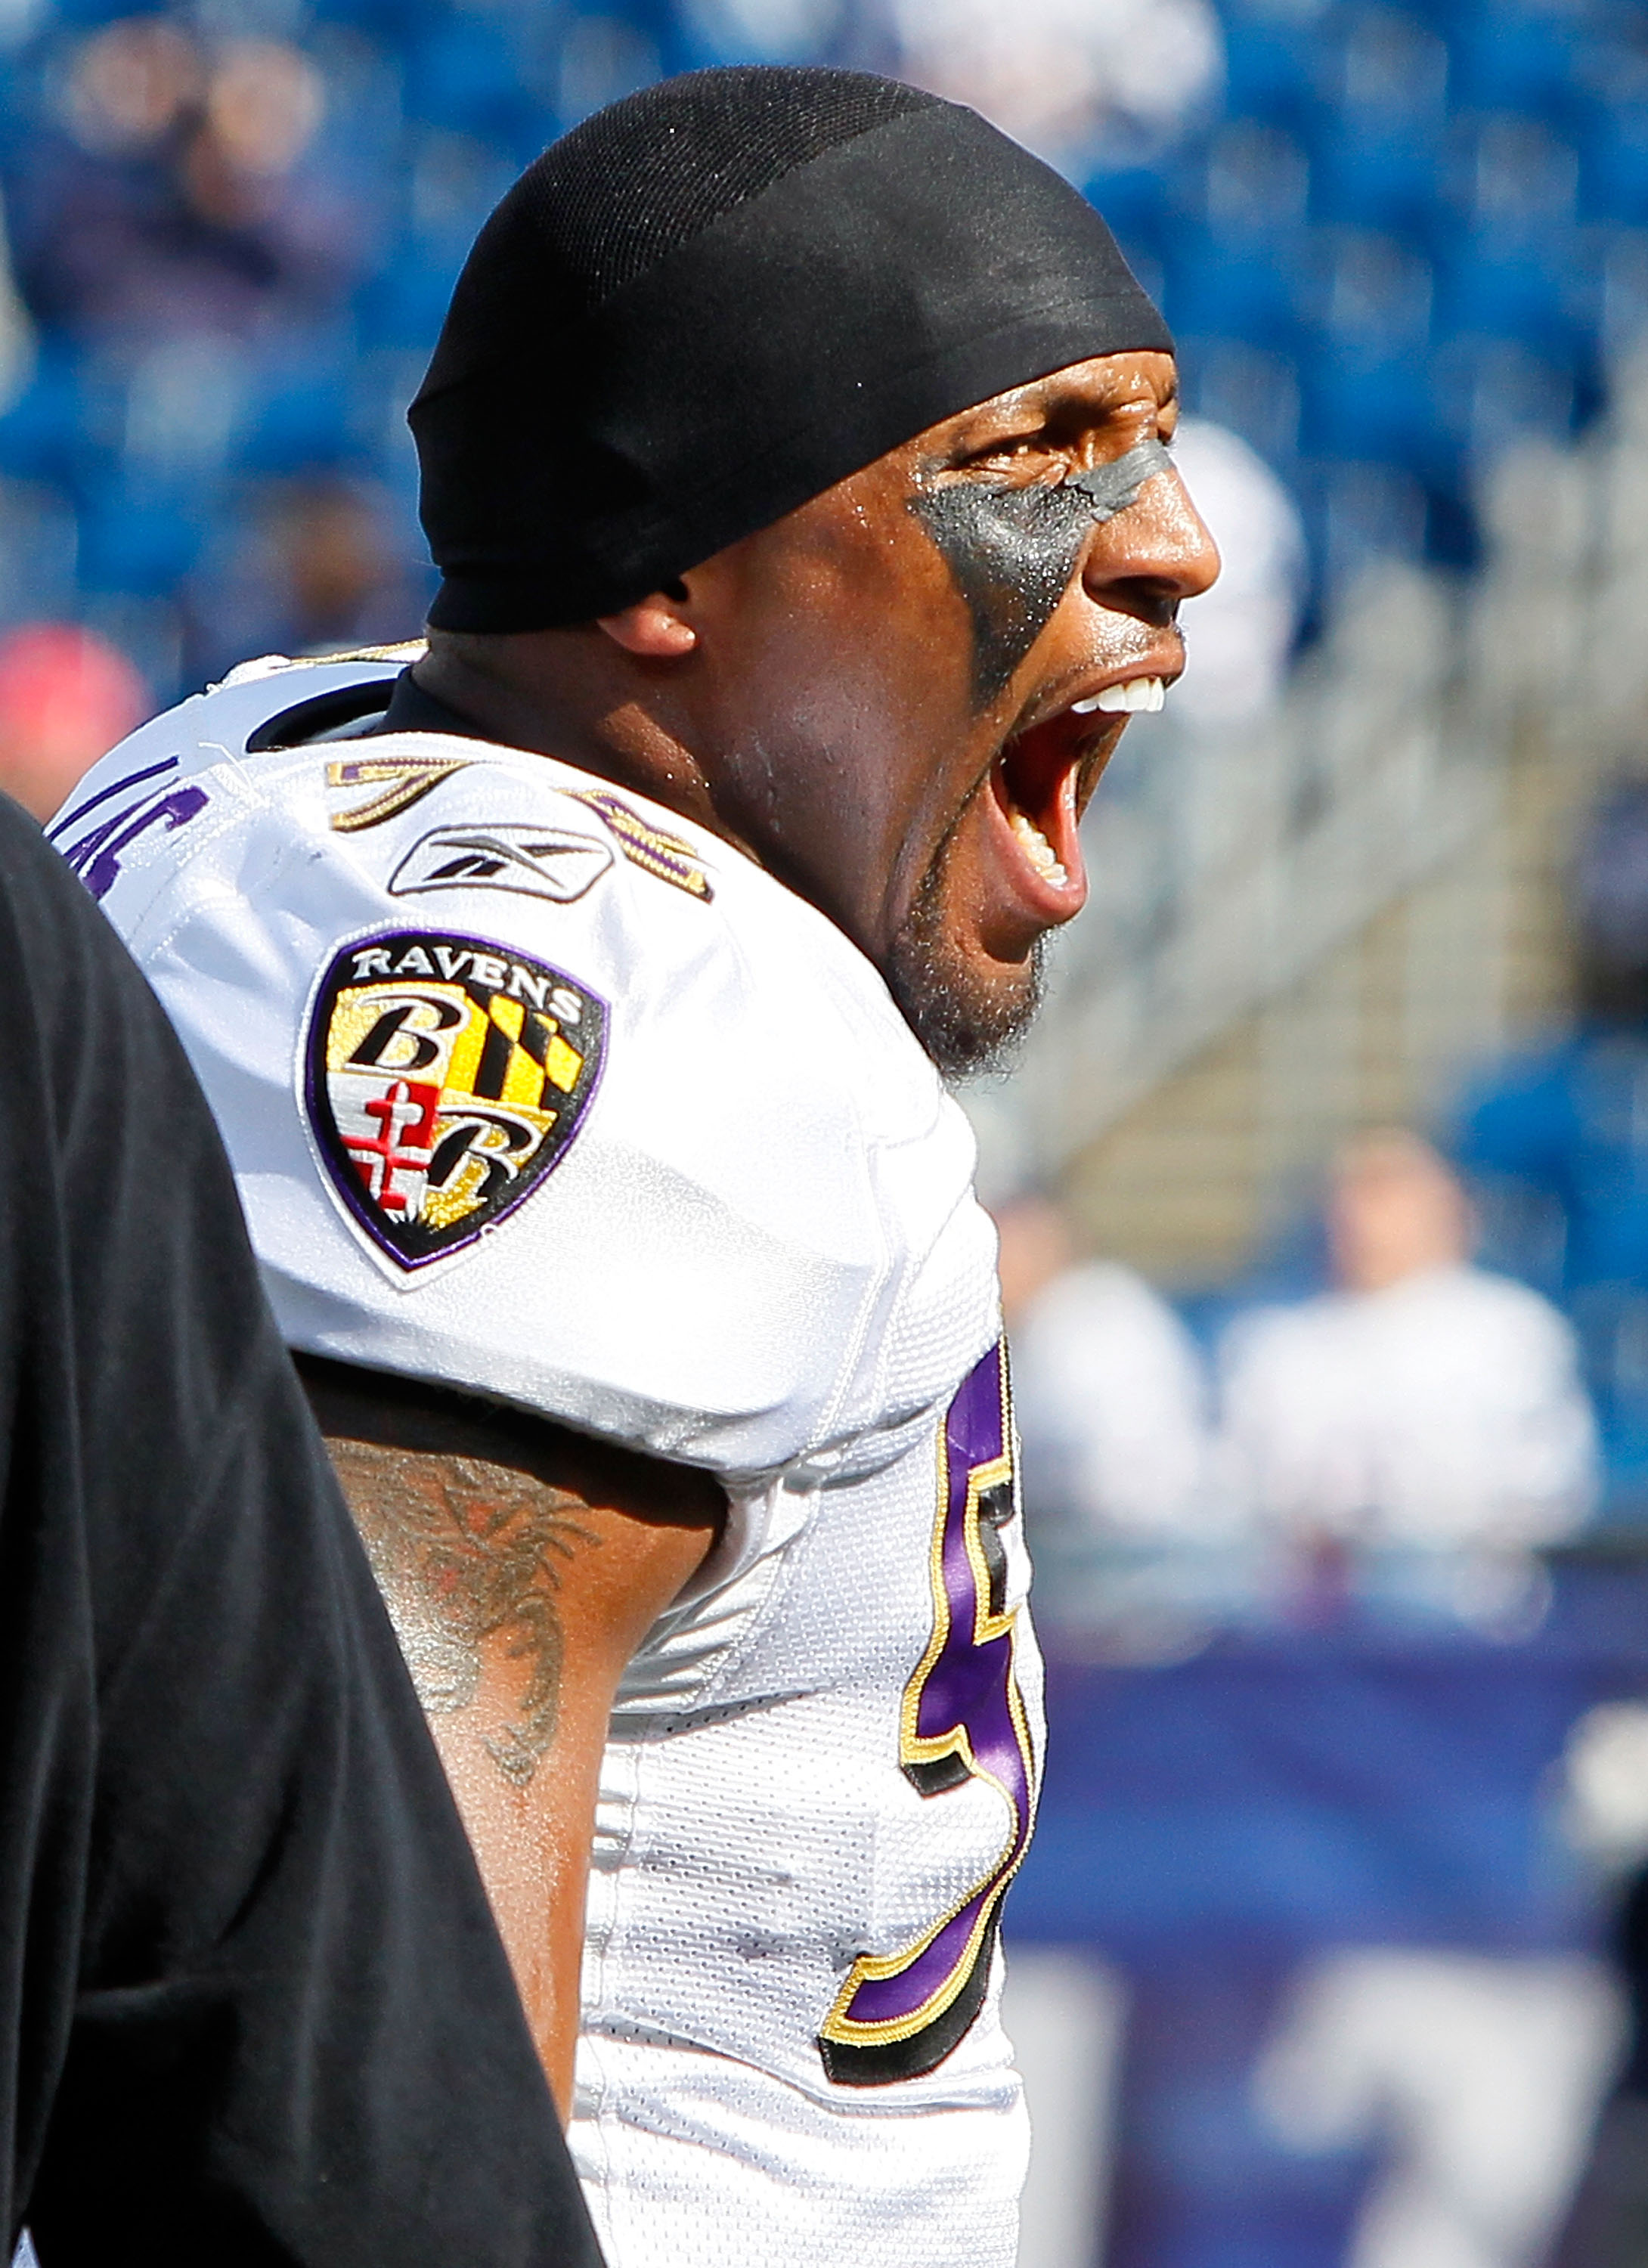 FOXBORO, MA - OCTOBER 17:  Ray Lewis #52 of the Baltimore Ravens reacts before a game with the New England Patriots at Gillette Stadium on October 17, 2010 in Foxboro, Massachusetts. (Photo by Jim Rogash/Getty Images)